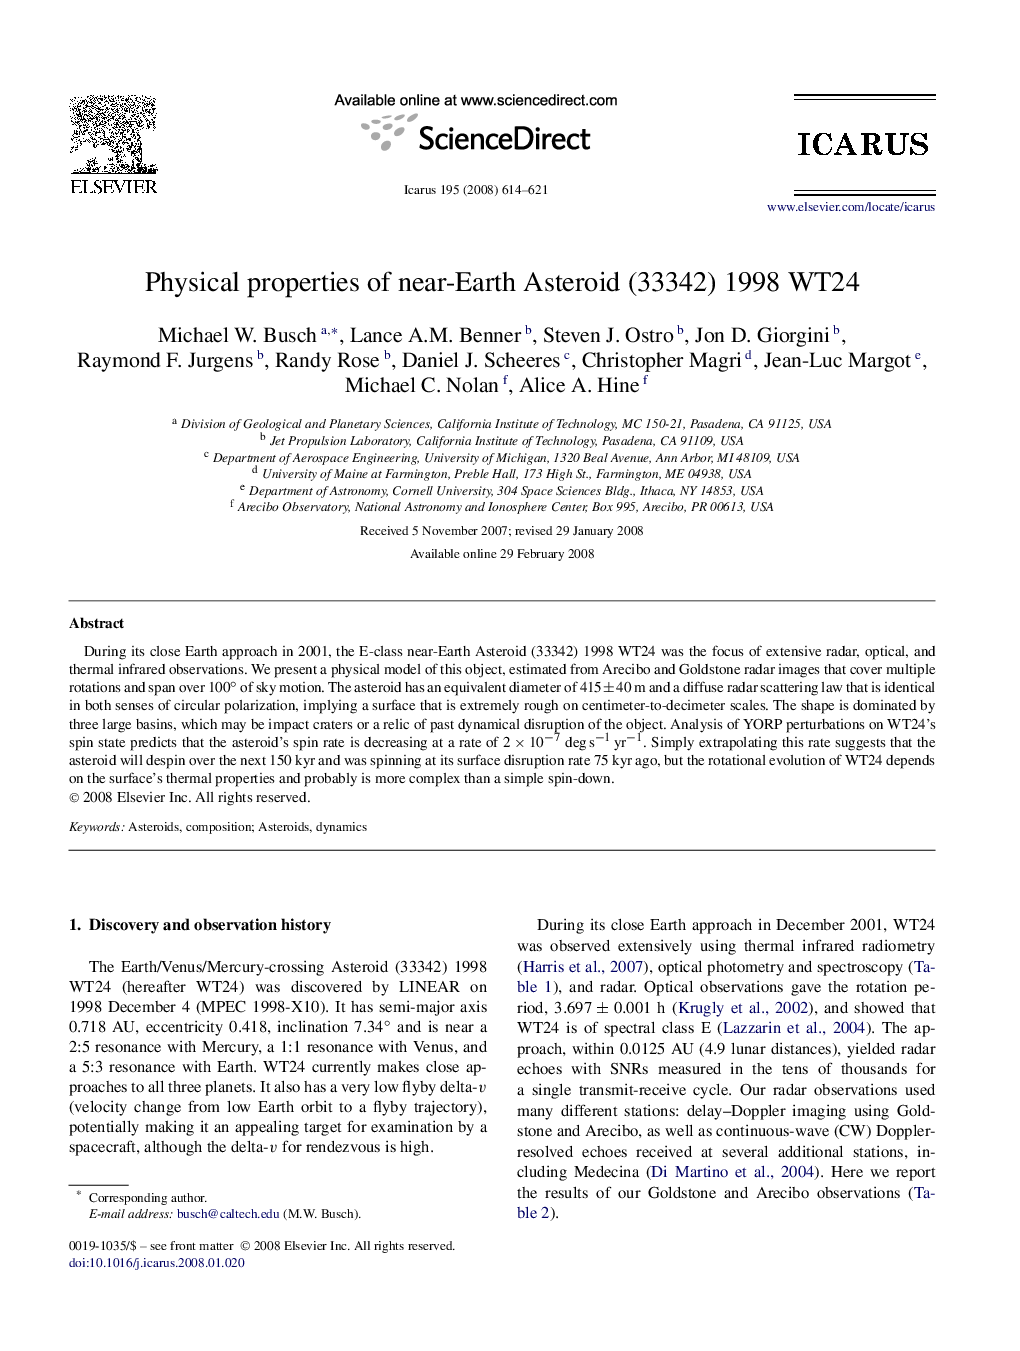 Physical properties of near-Earth Asteroid (33342) 1998 WT24